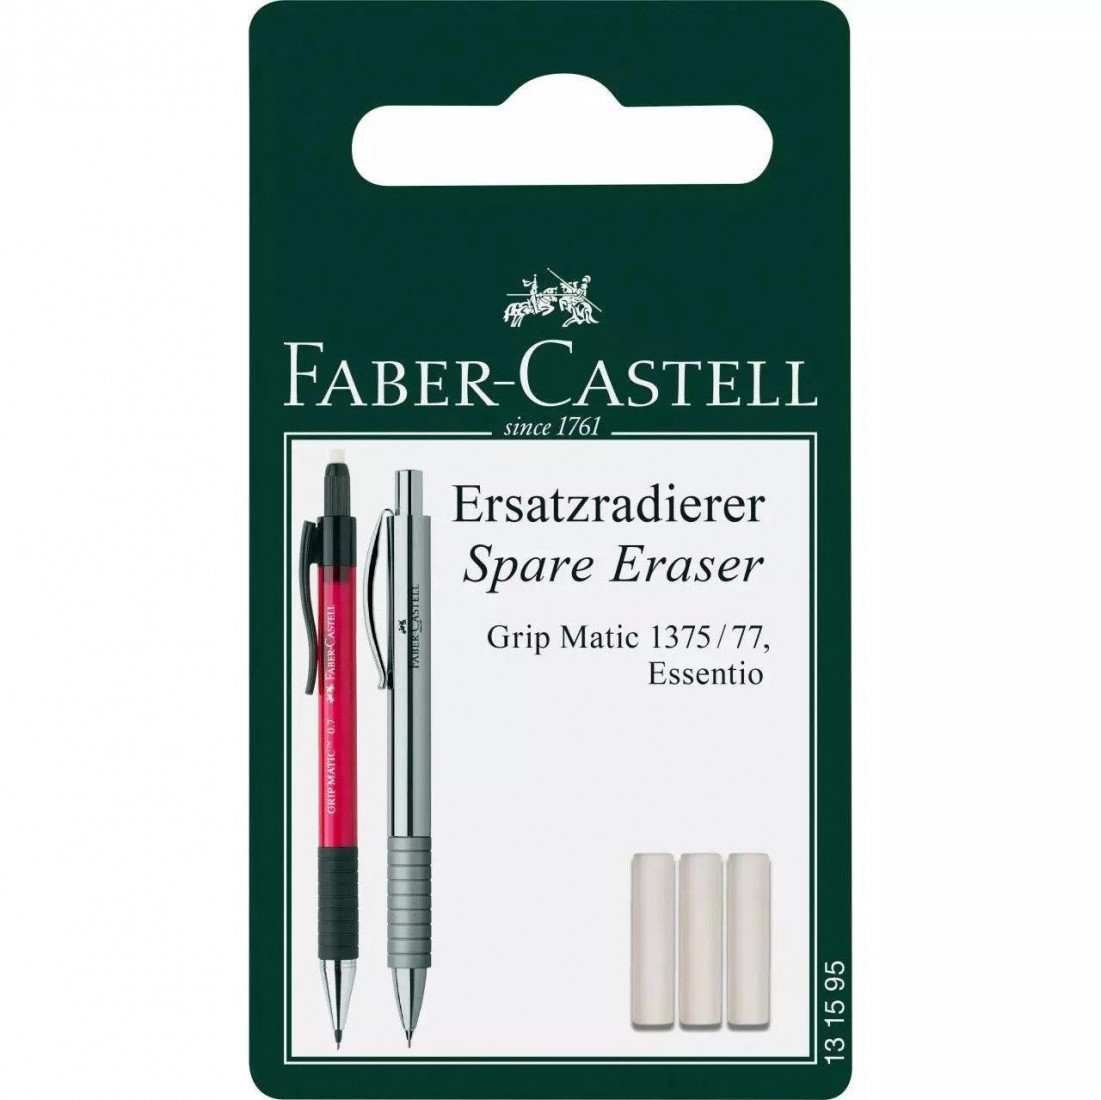 Faber Castell Grip Matic spare erasers for mechanical pencil, set of 3, 131595